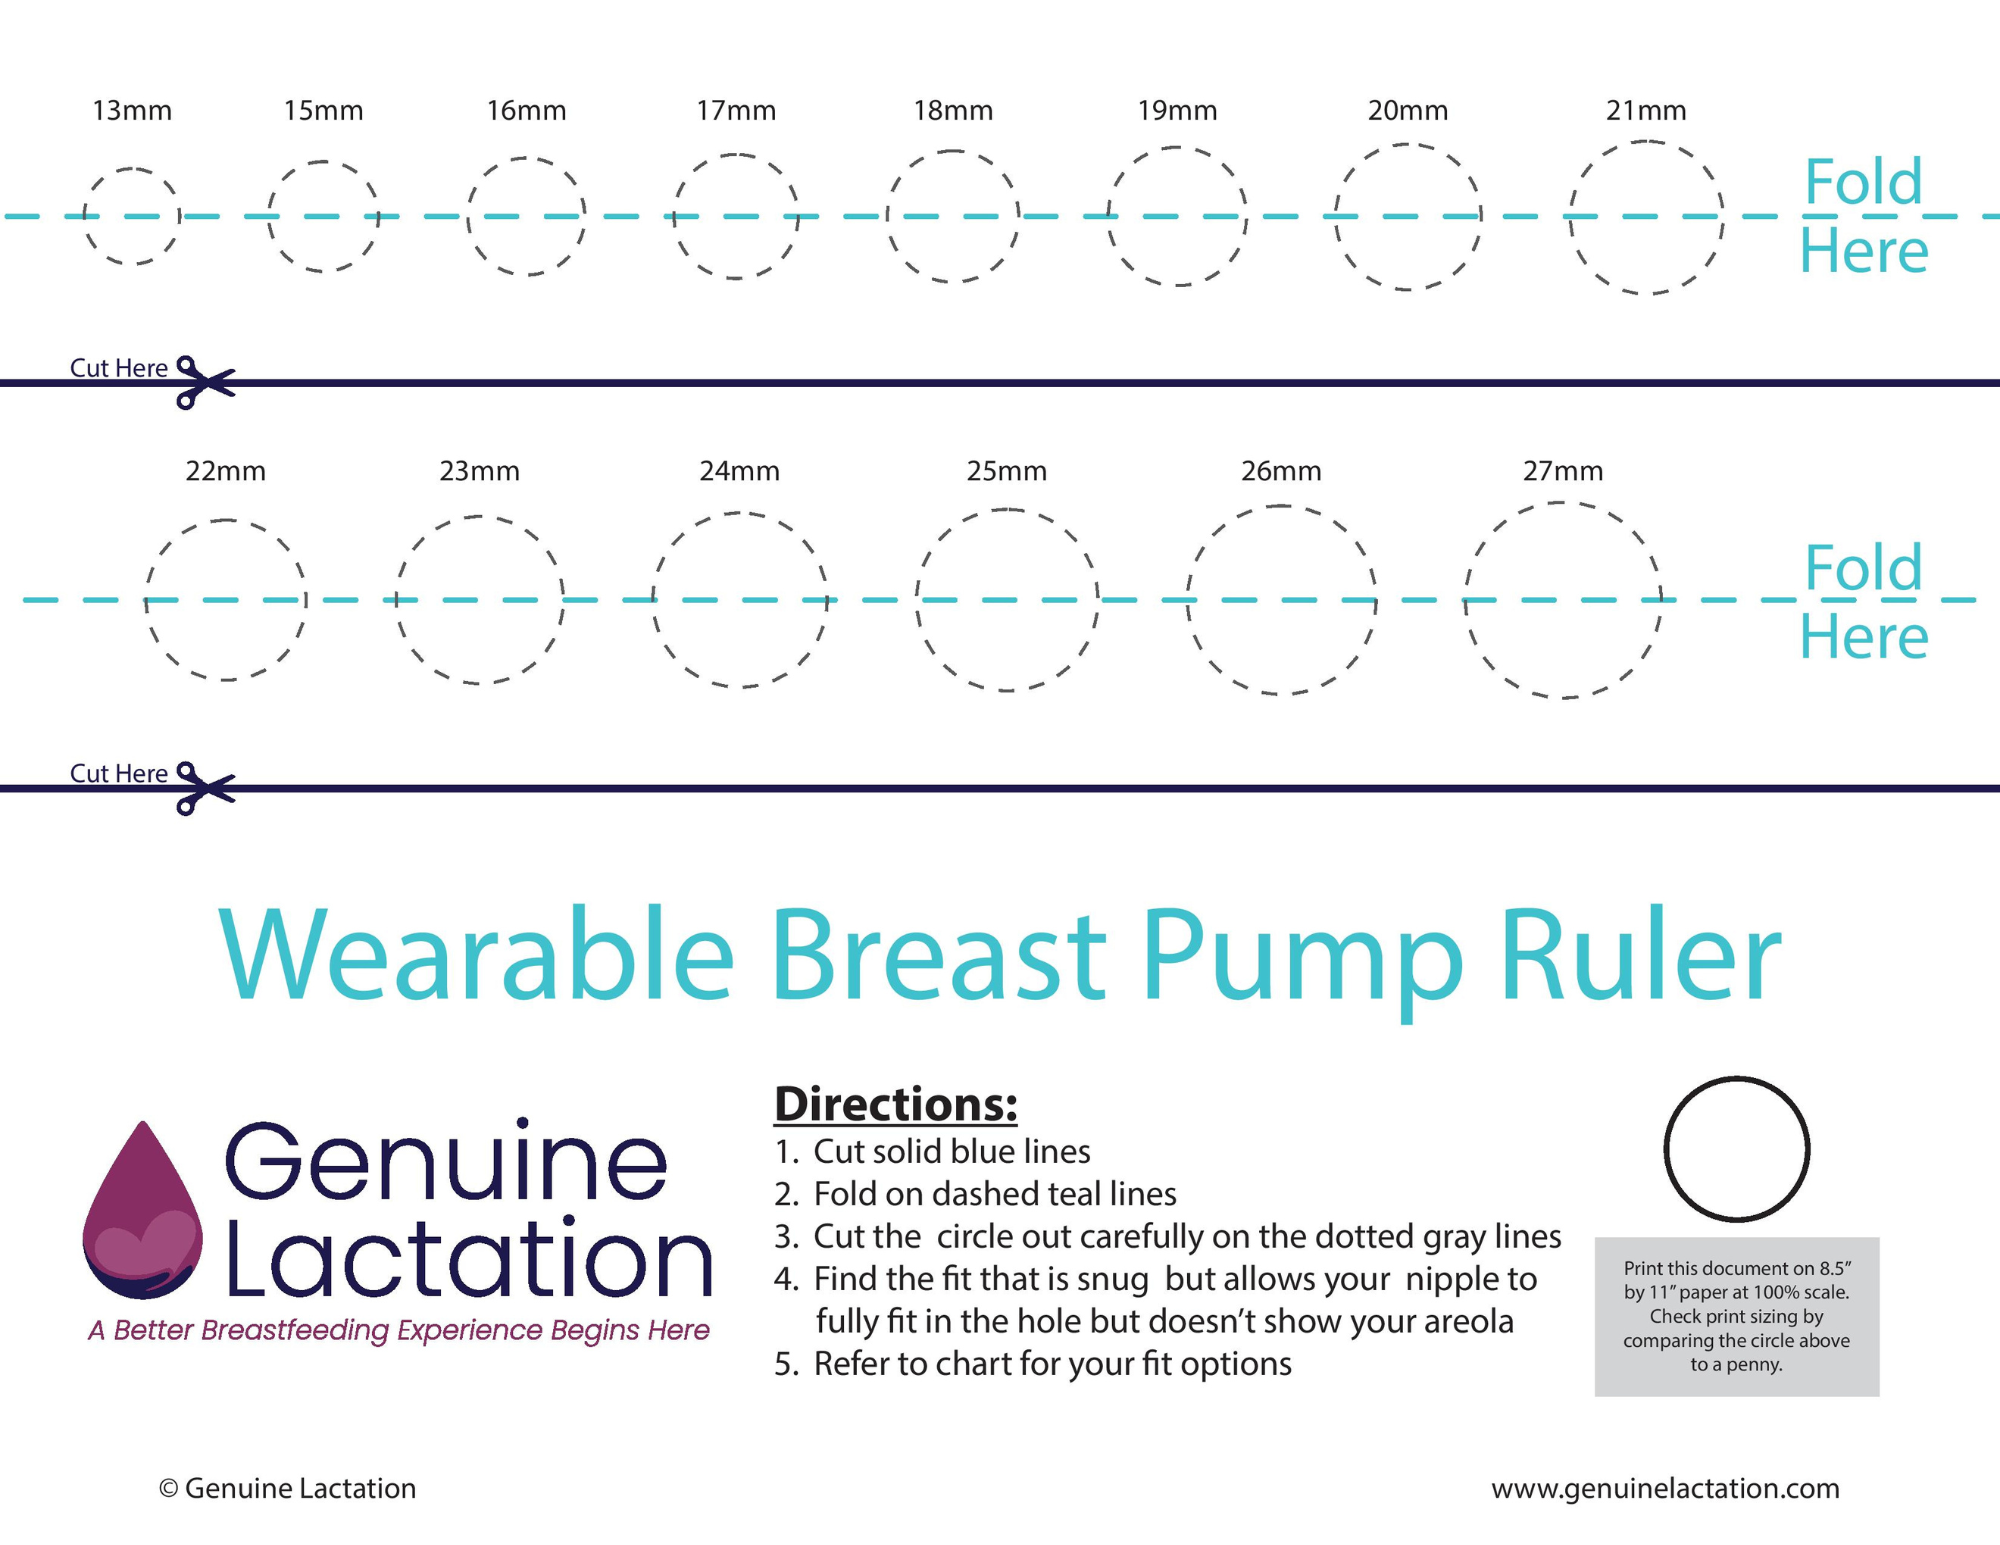 What Happens if Your Pump Flanges are Too Small? — Genuine Lactation